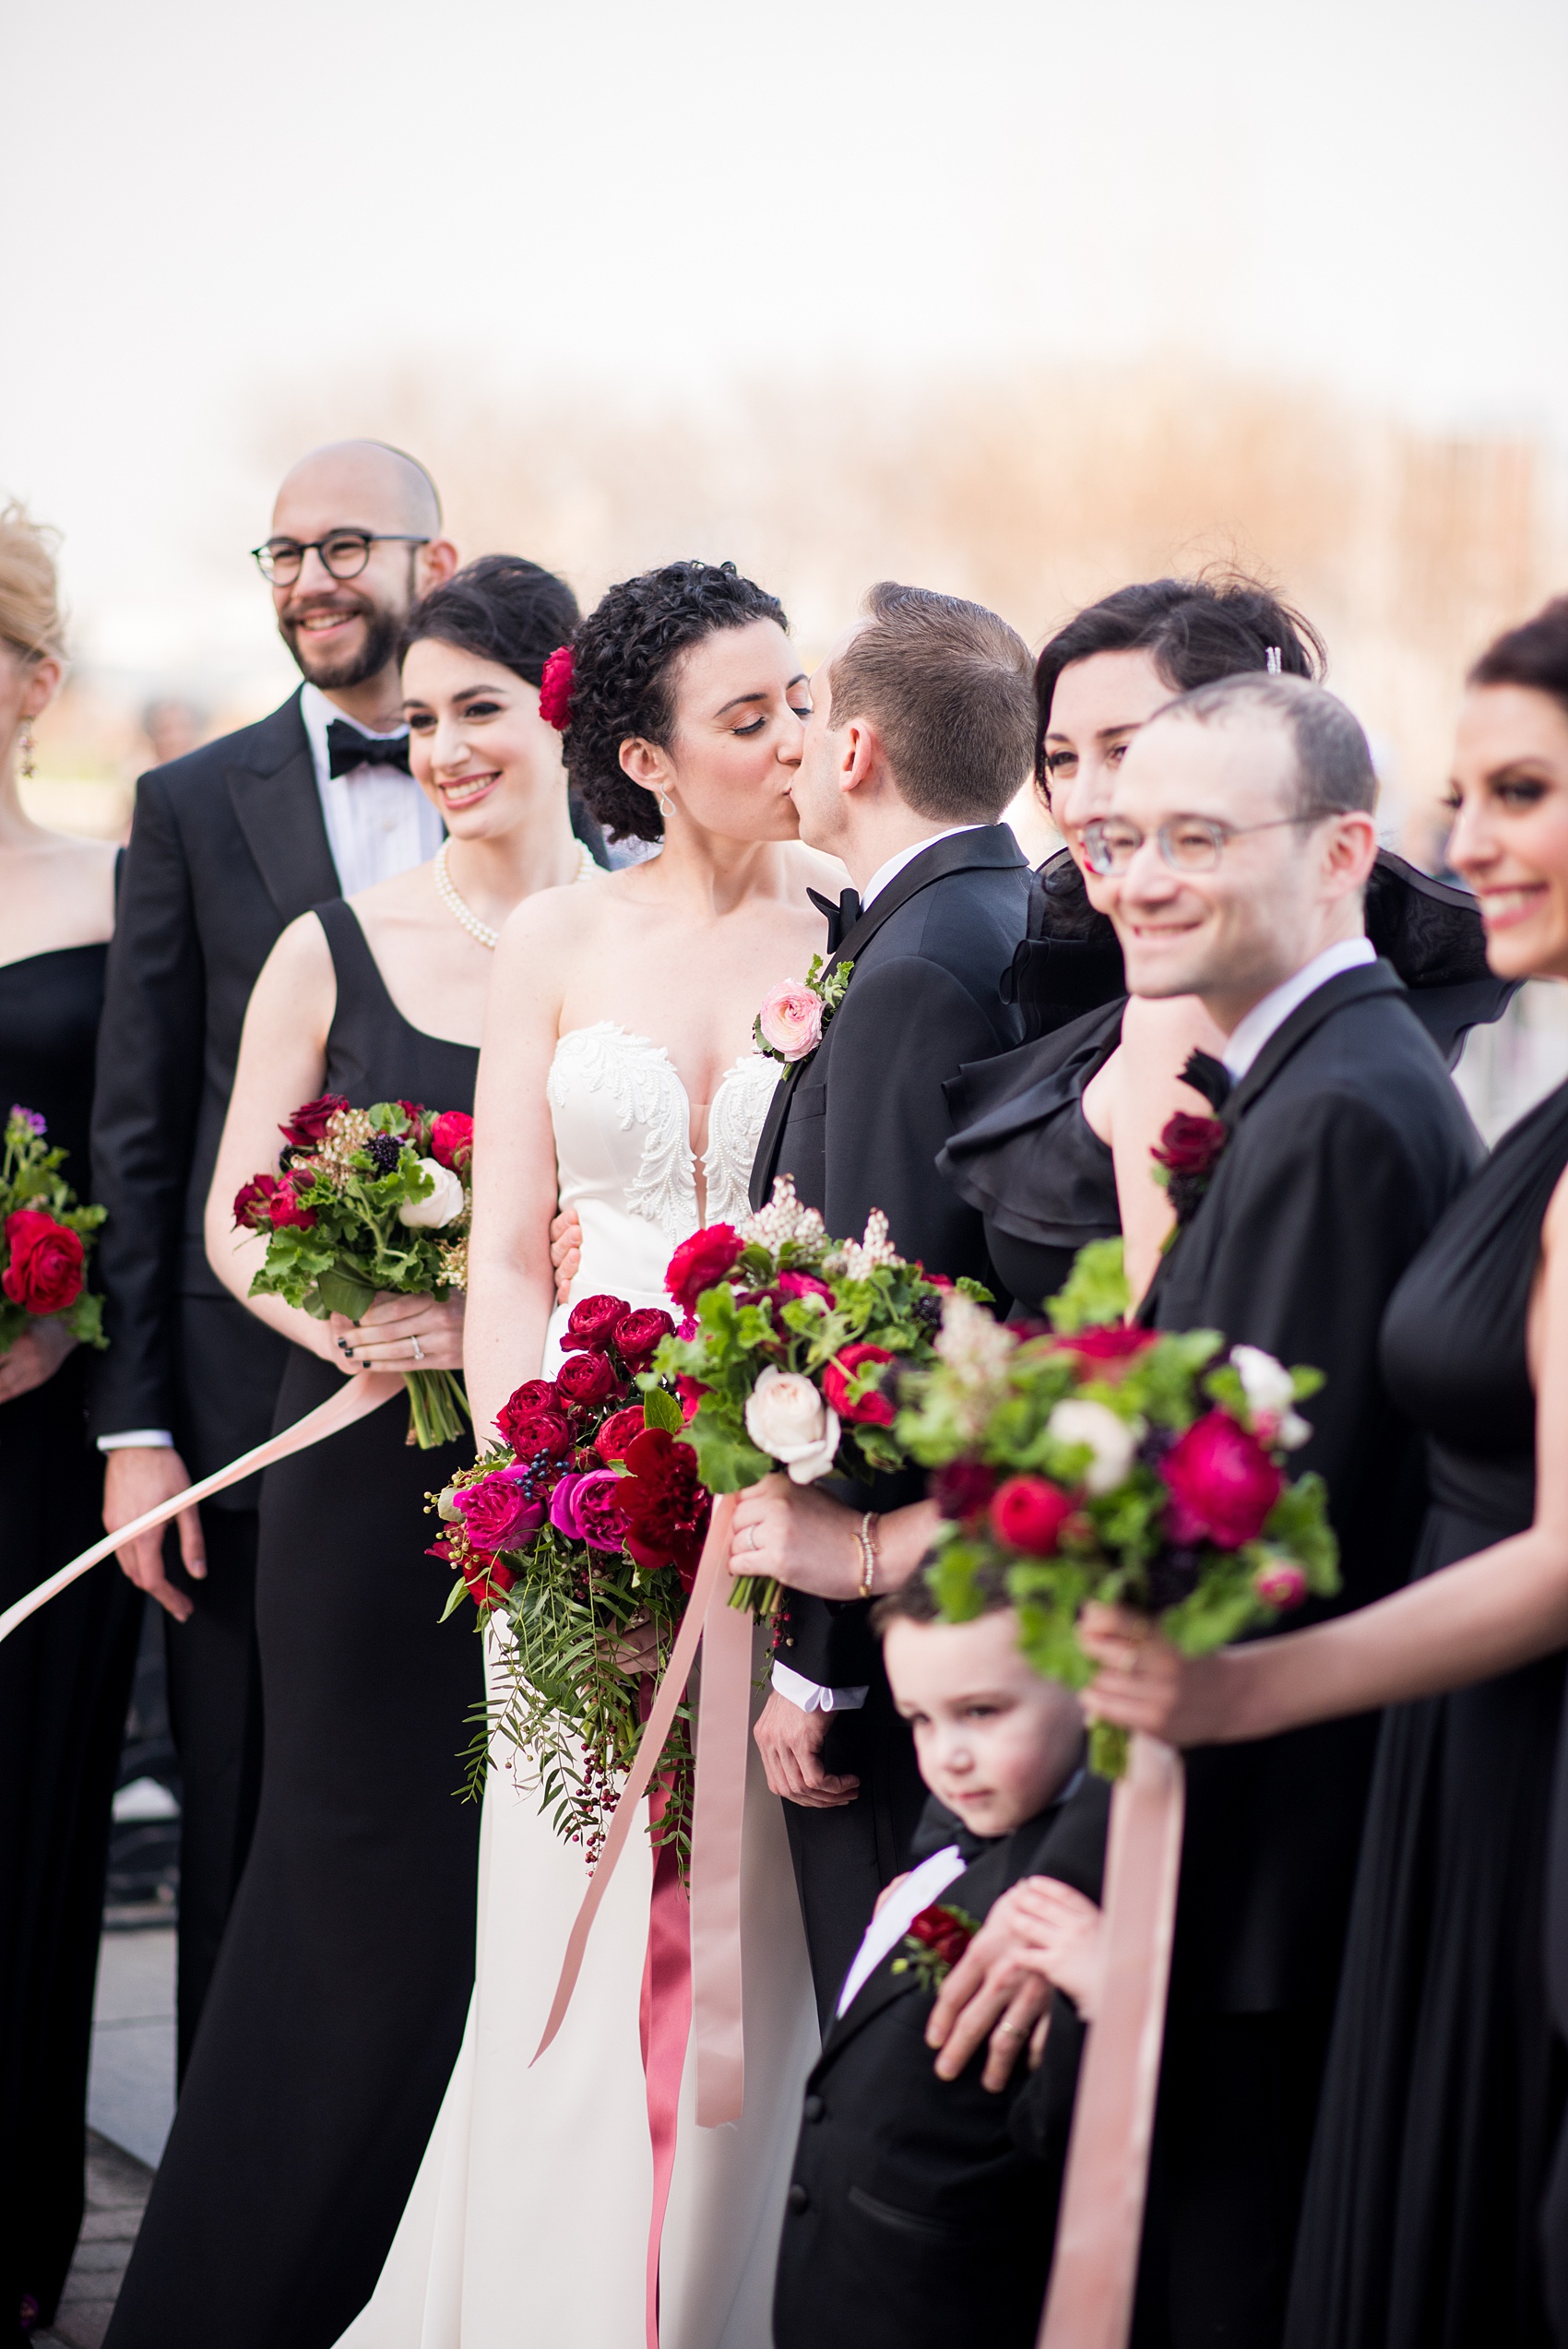 W Hoboken wedding photos at this New Jersey hotel overlooking the NYC skyline. Candid photos by Mikkel Paige Photography of the bridal party in black gowns carrying romantic bouquets in red and pink and groomsmen in black tuxedos. #mikkelpaige #HobokenWedding #NewJerseyPhotographer #NewYorkCityPhotographer #NYCweddingphotographer #brideandgroomphotos #redpeonies #romanticwedding #springwedding #CityWedding